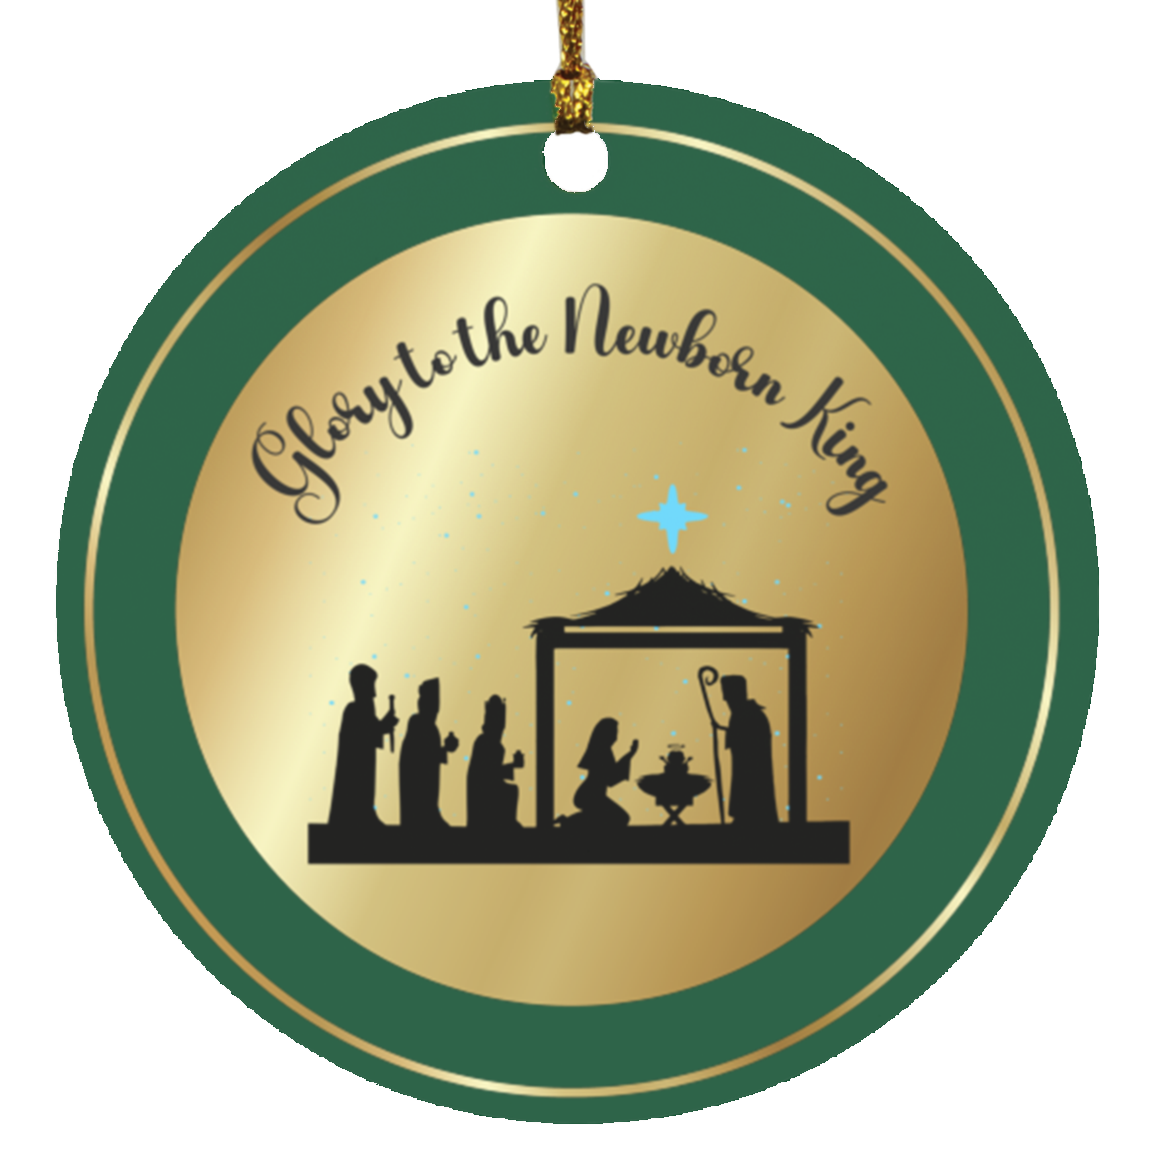 Glory to the newborn King - Wooden Circle Ornament